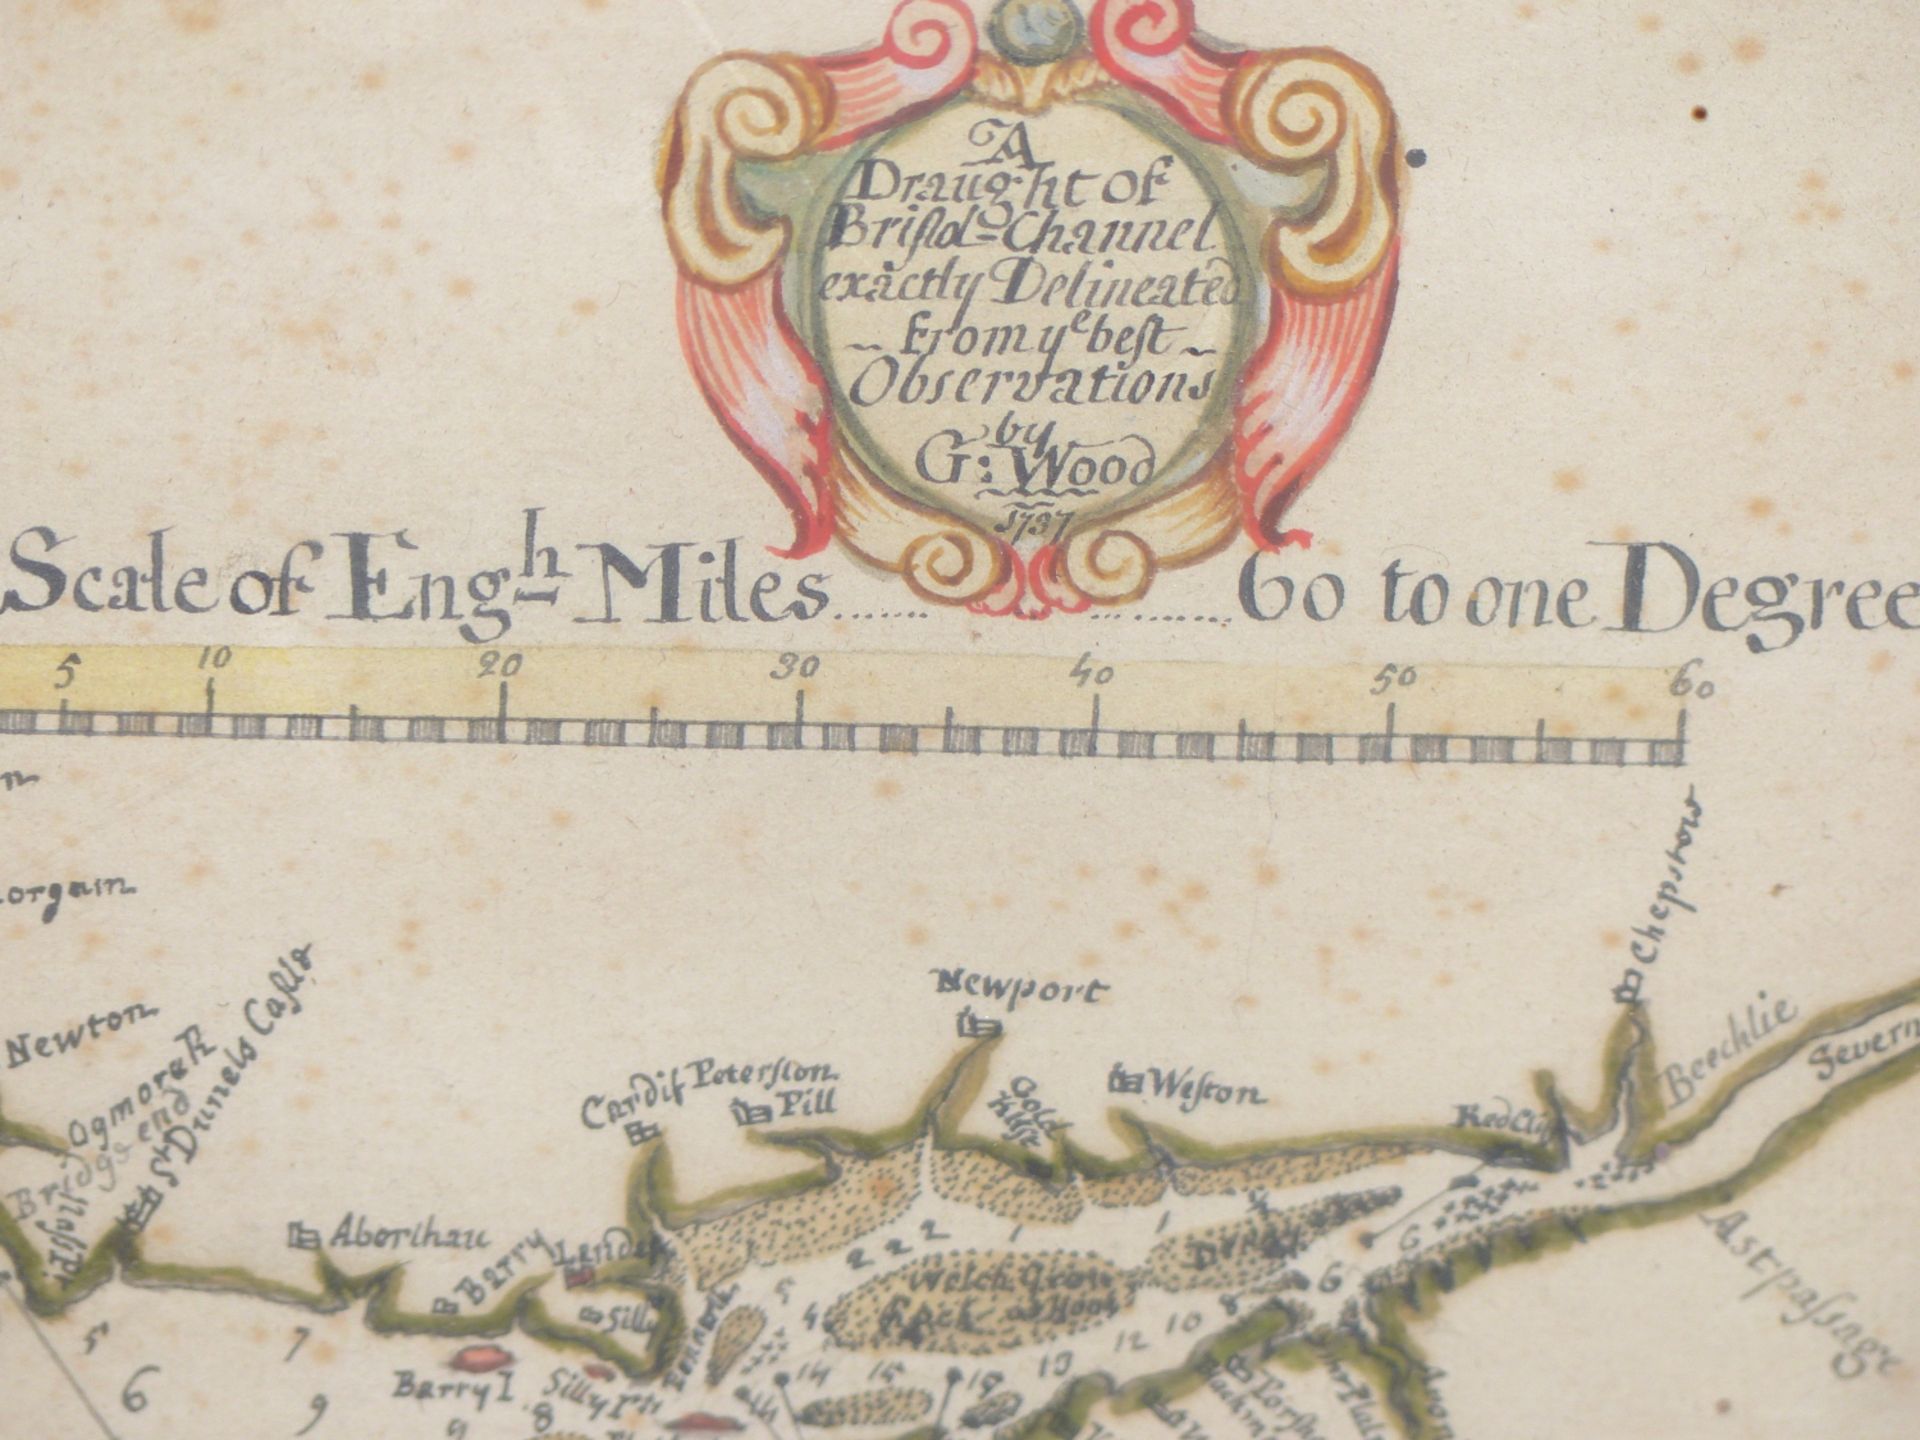 G. WOOD (CARTOGRAPHER) 18TH CENTURY ENGLISH. A DRAUGHT(SIC) OF THE BRISTOL CHANNEL EXACTLY - Image 2 of 9